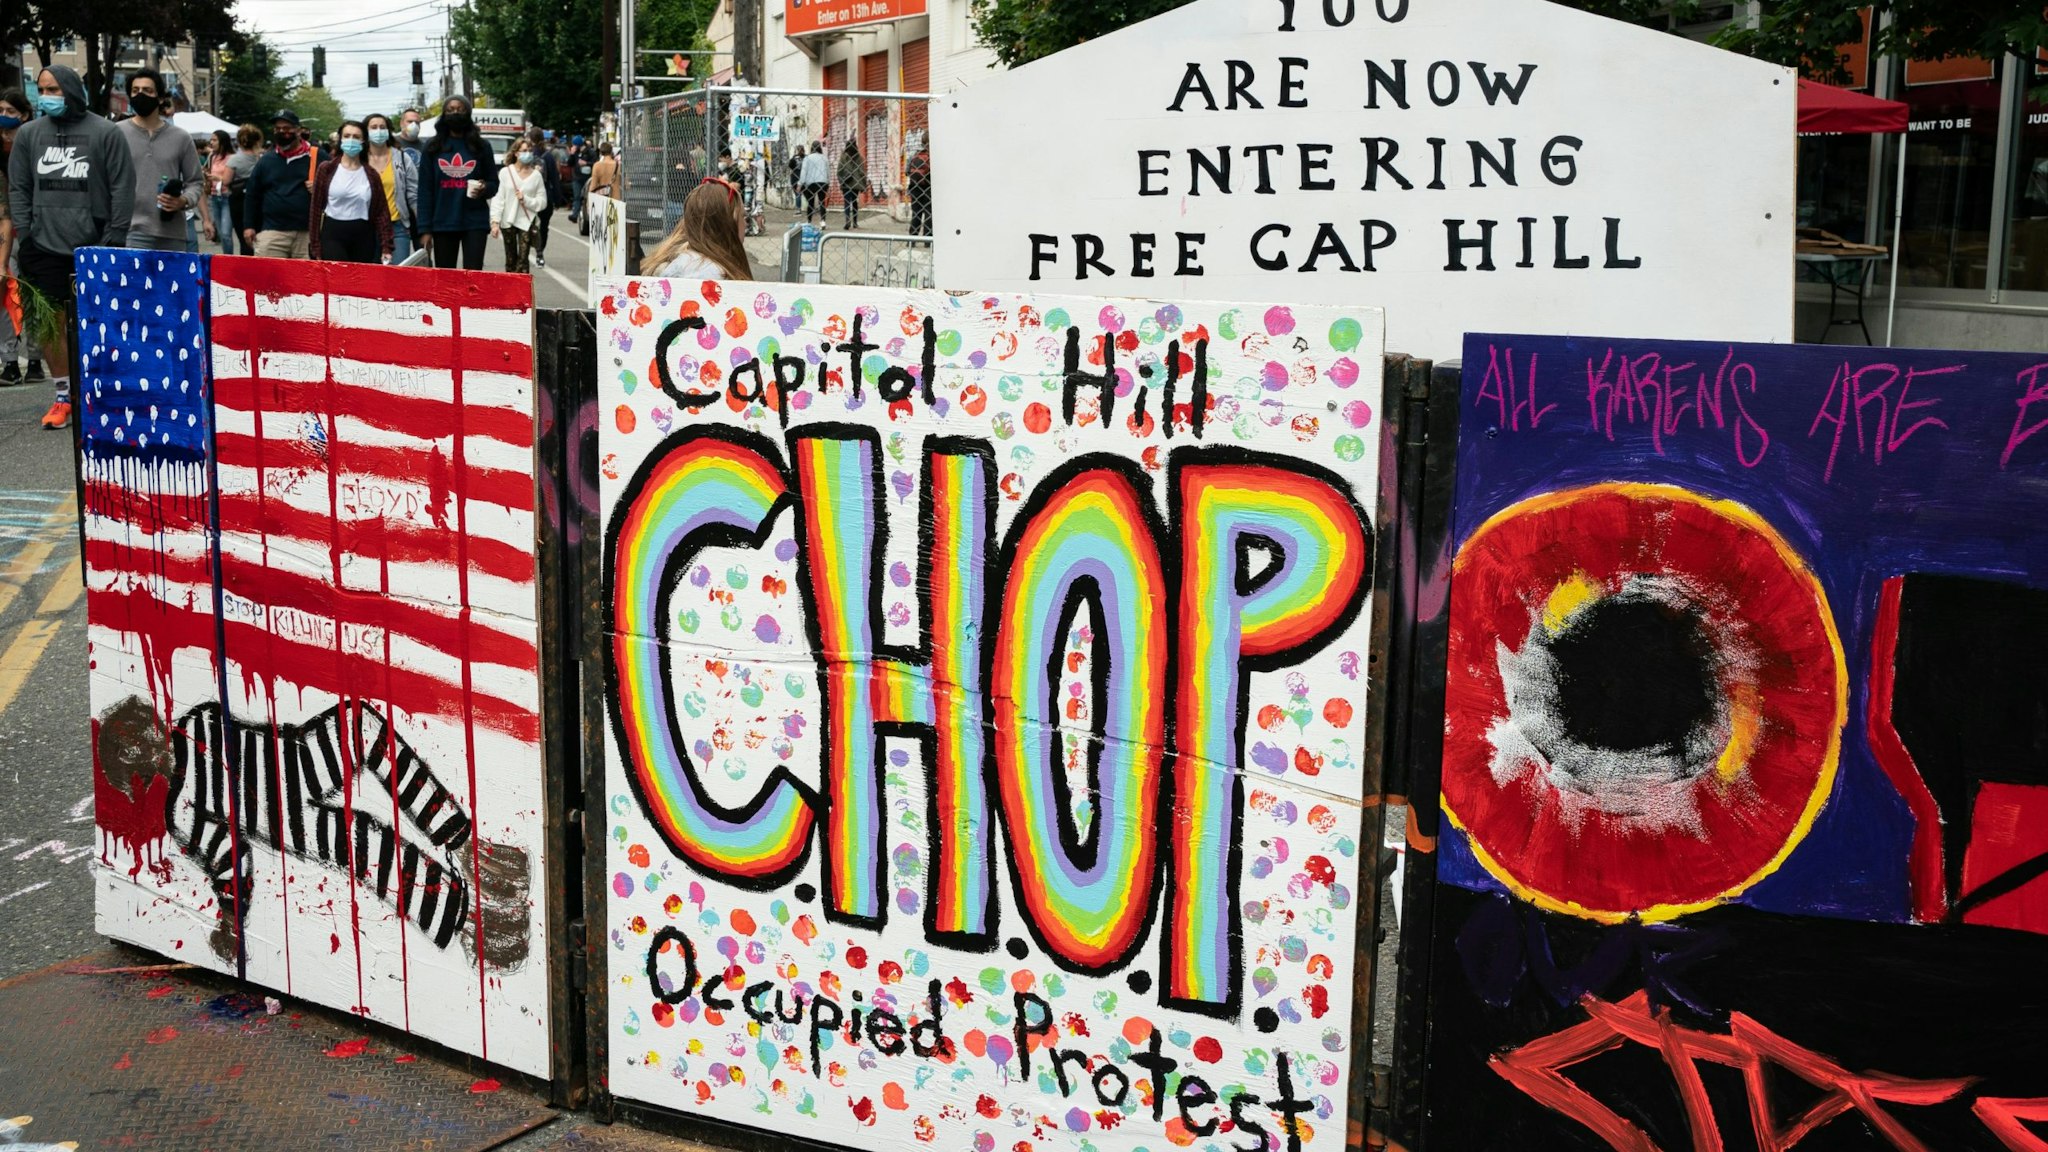 SEATTLE, WA - JUNE 14: A signs reads "Capitol Hill Occupied Protest" in area that has been referred to by protesters by that name as well as "Capitol Hill Organized Protest, or CHOP, on June 14, 2020 in Seattle, Washington. Black Lives Matter protesters have continued demonstrating in what was first referred to as the Capitol Hill Autonomous Zone, which encompasses several blocks around the Seattle Police Departments vacated East Precinct, but what protesters are now calling the "Capitol Hill Organized Protest." (Photo by David Ryder/Getty Images)